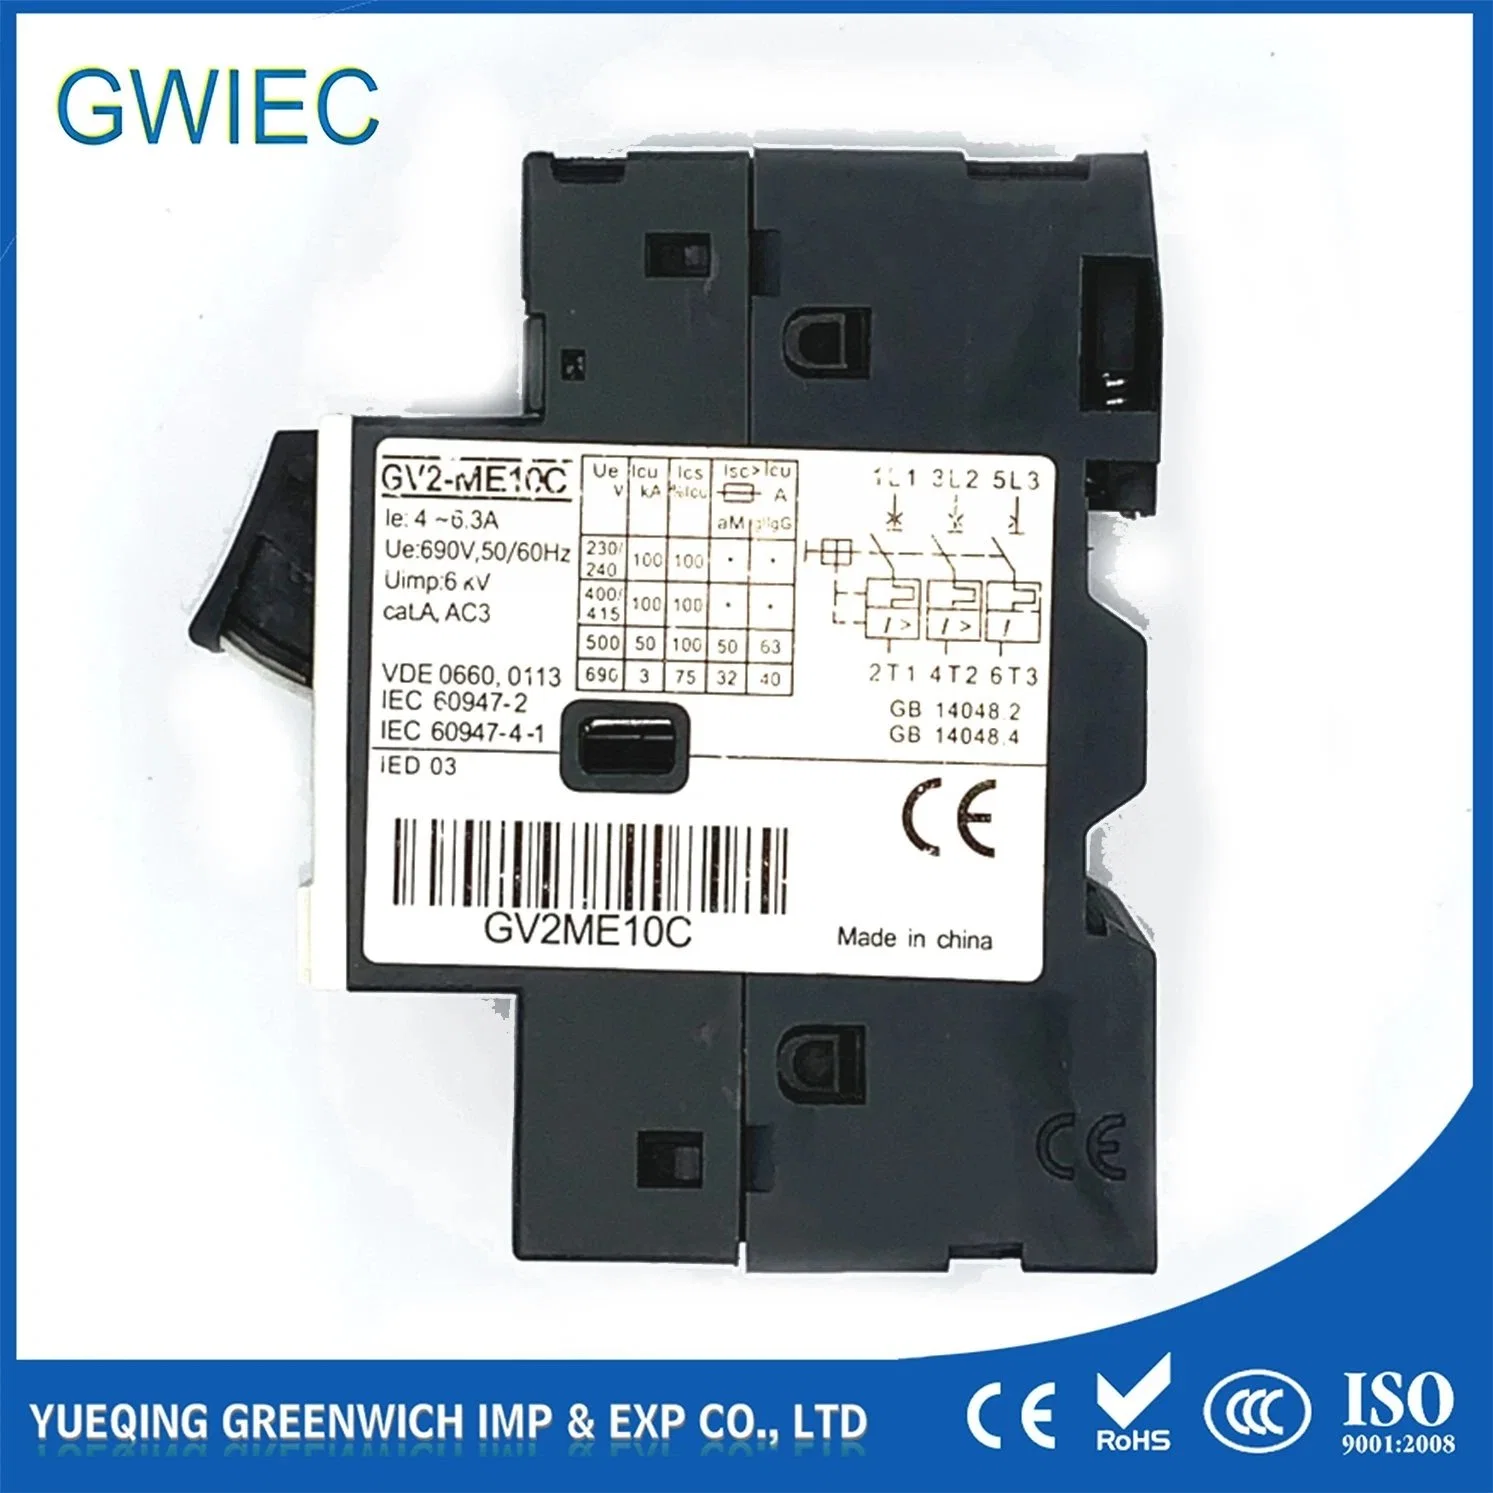 0.63-1.0 1.6-2.5 Breaker Overcurrent Overload Protection Motor Circuit Protector with Factory Price